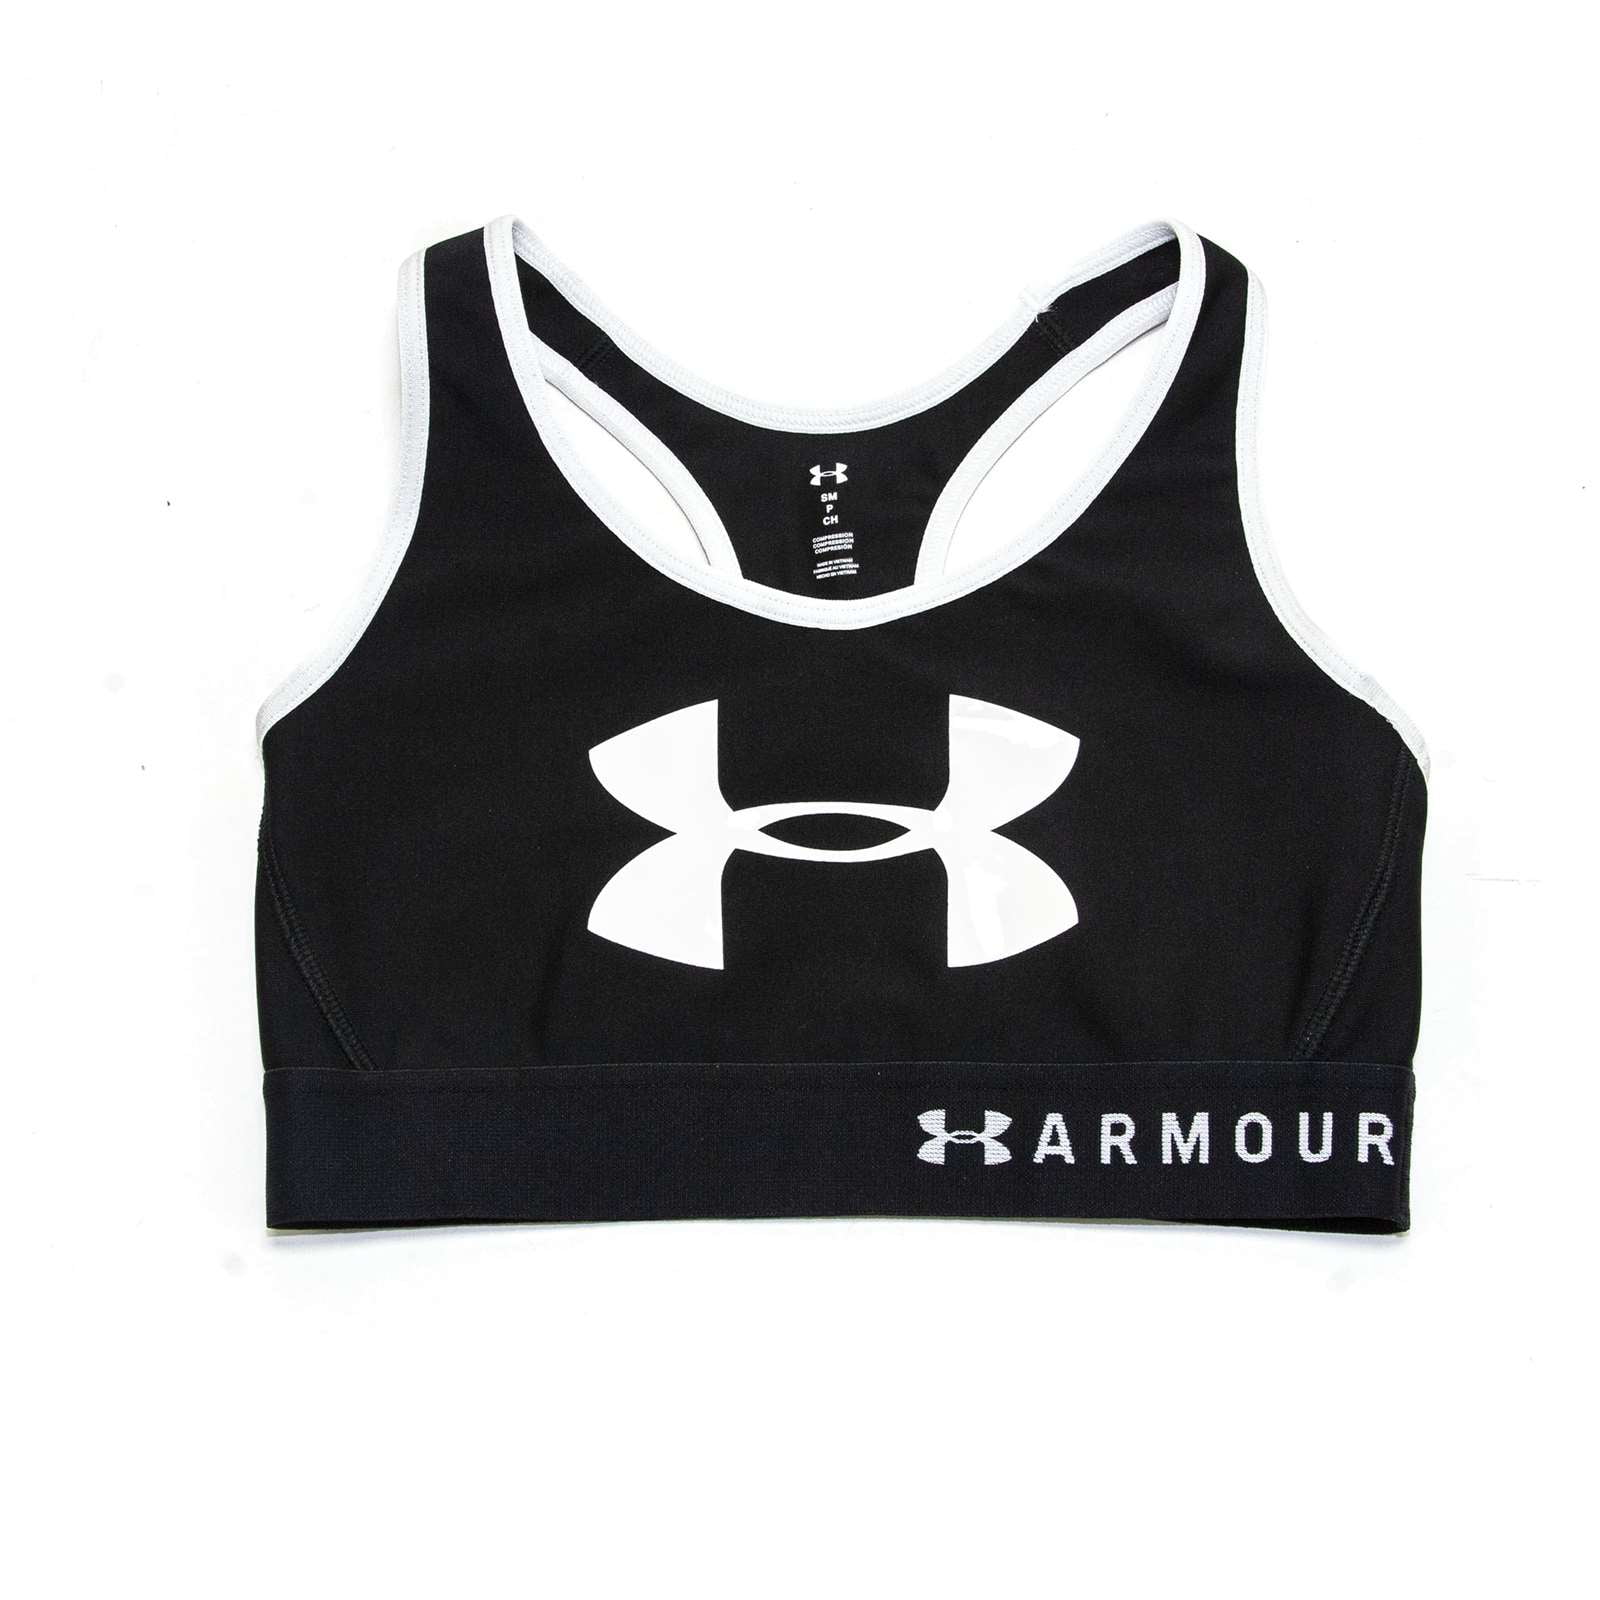 Under Armour Armour Mid Keyhole Women's Bra, Black,Size MD price